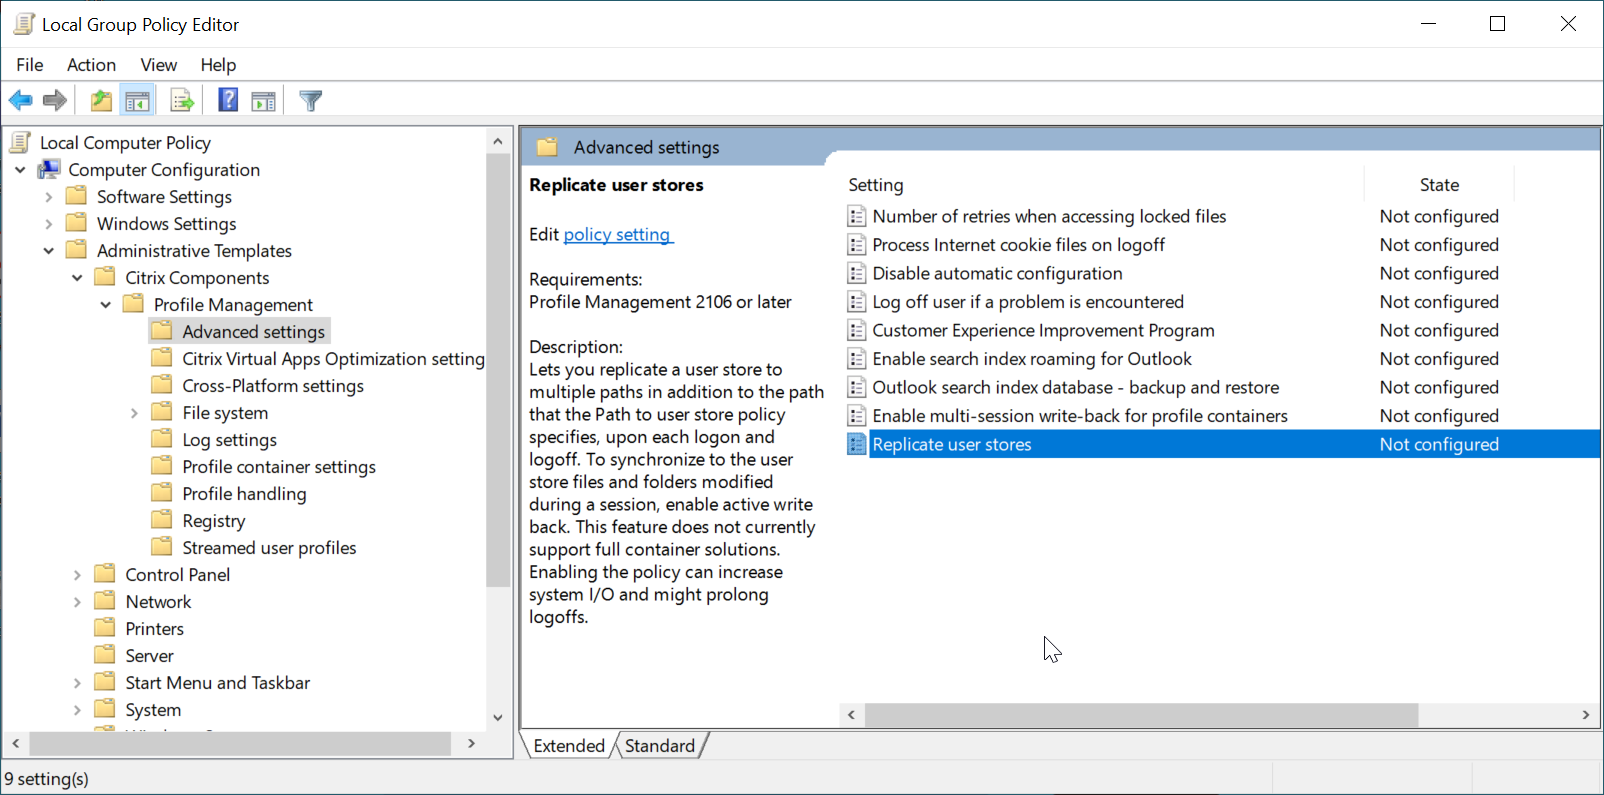 Configuring the Replicate user stores policy through Microsoft Active Directory Group Policy Management